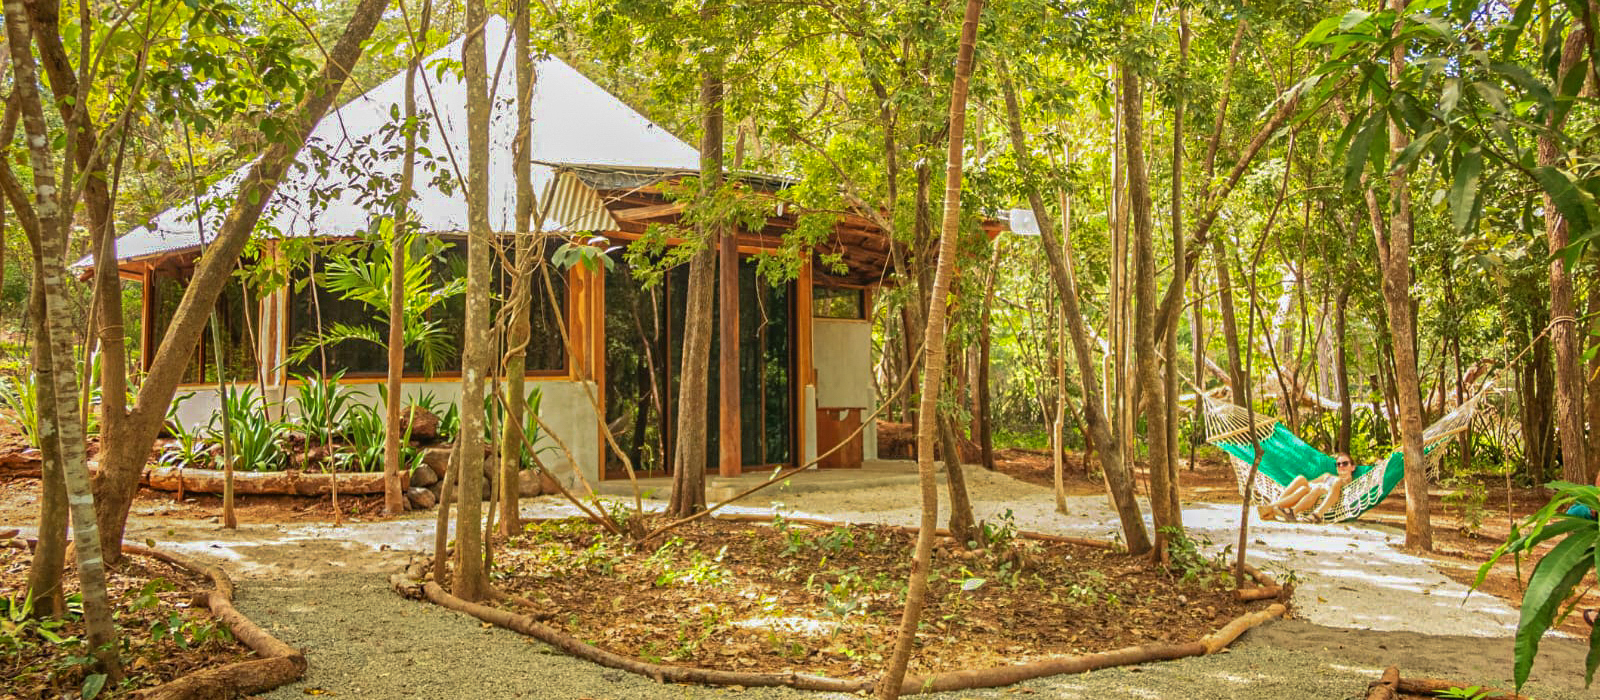 Dreamsea Surf Camp Costa Rica | Experience | Accommodations & Rates | Picture of a cabin in Costa Rica